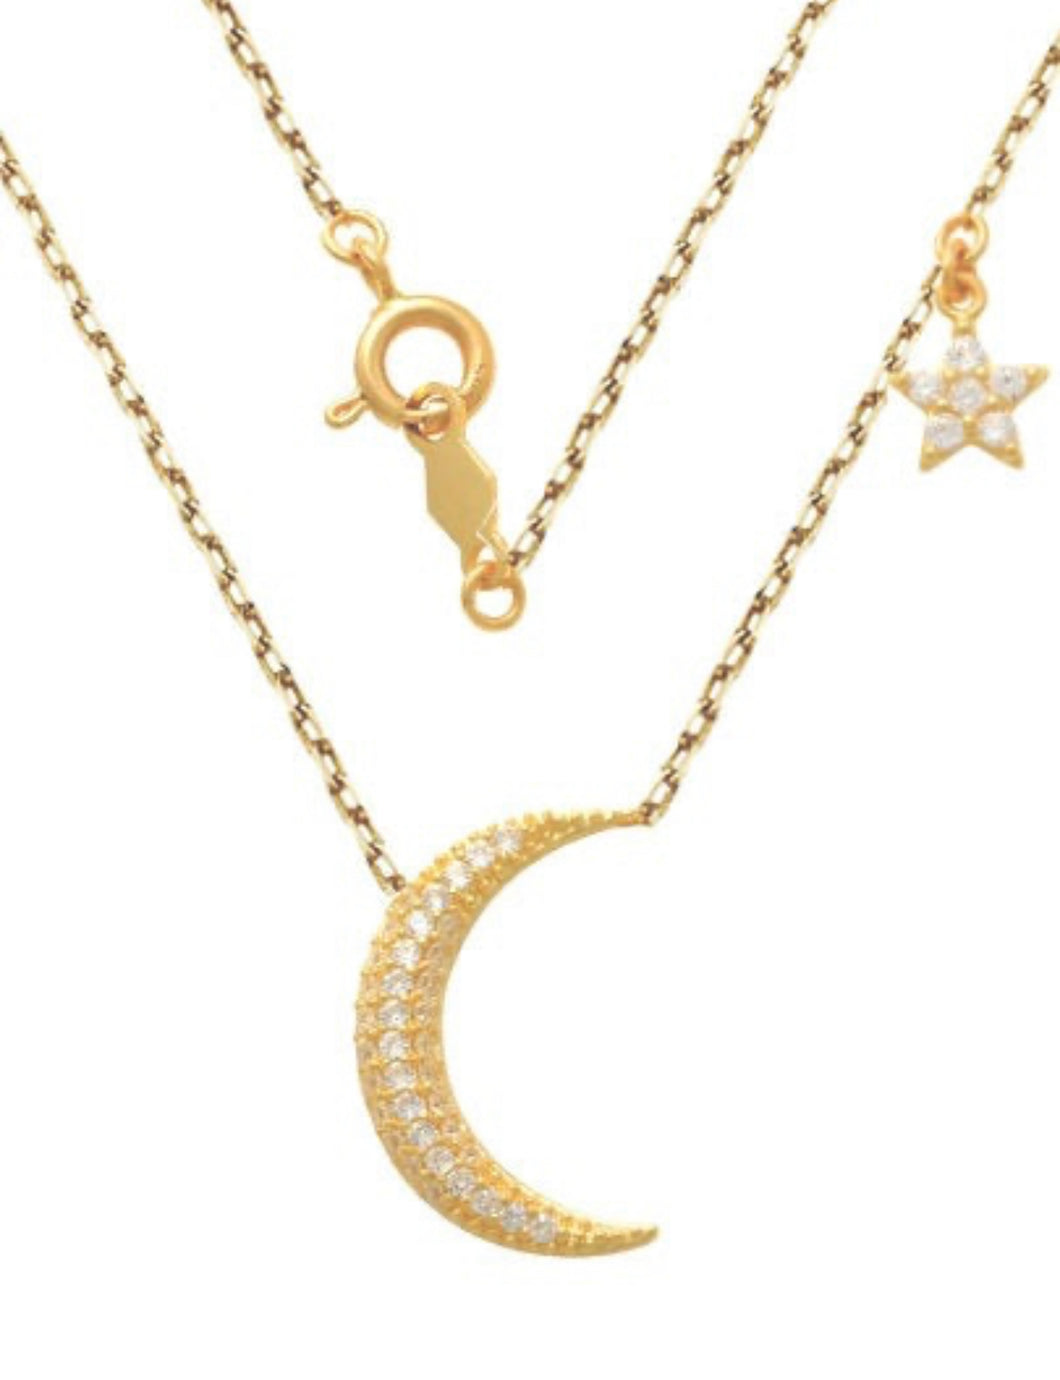 Solid 14k Yellow Gold Moon and Star Diamond Necklace, Dainty Crescent Charm Pendant - Elegant Moon and Star Necklace - Star Necklace